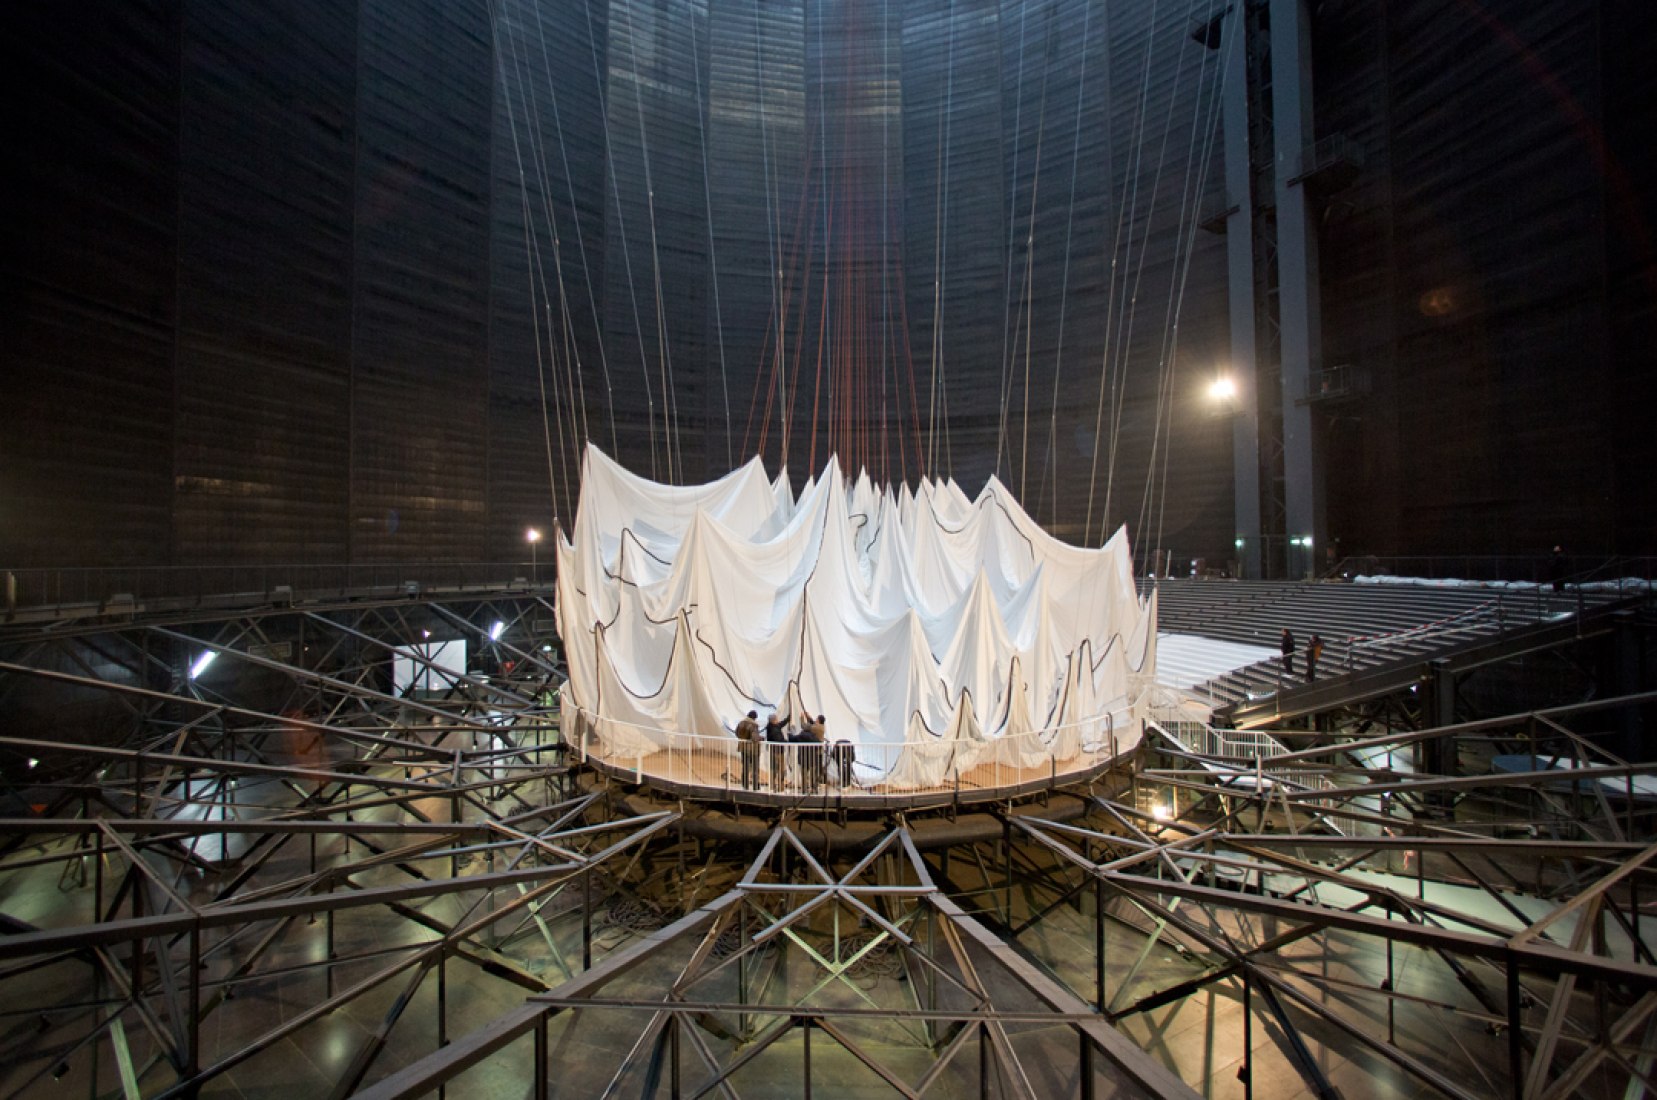 Construction of Christo's Big Air Package at Gasometer Oberhausen, Germany February 2013. Photo: Wolfgang Volz © 2013 Christo.